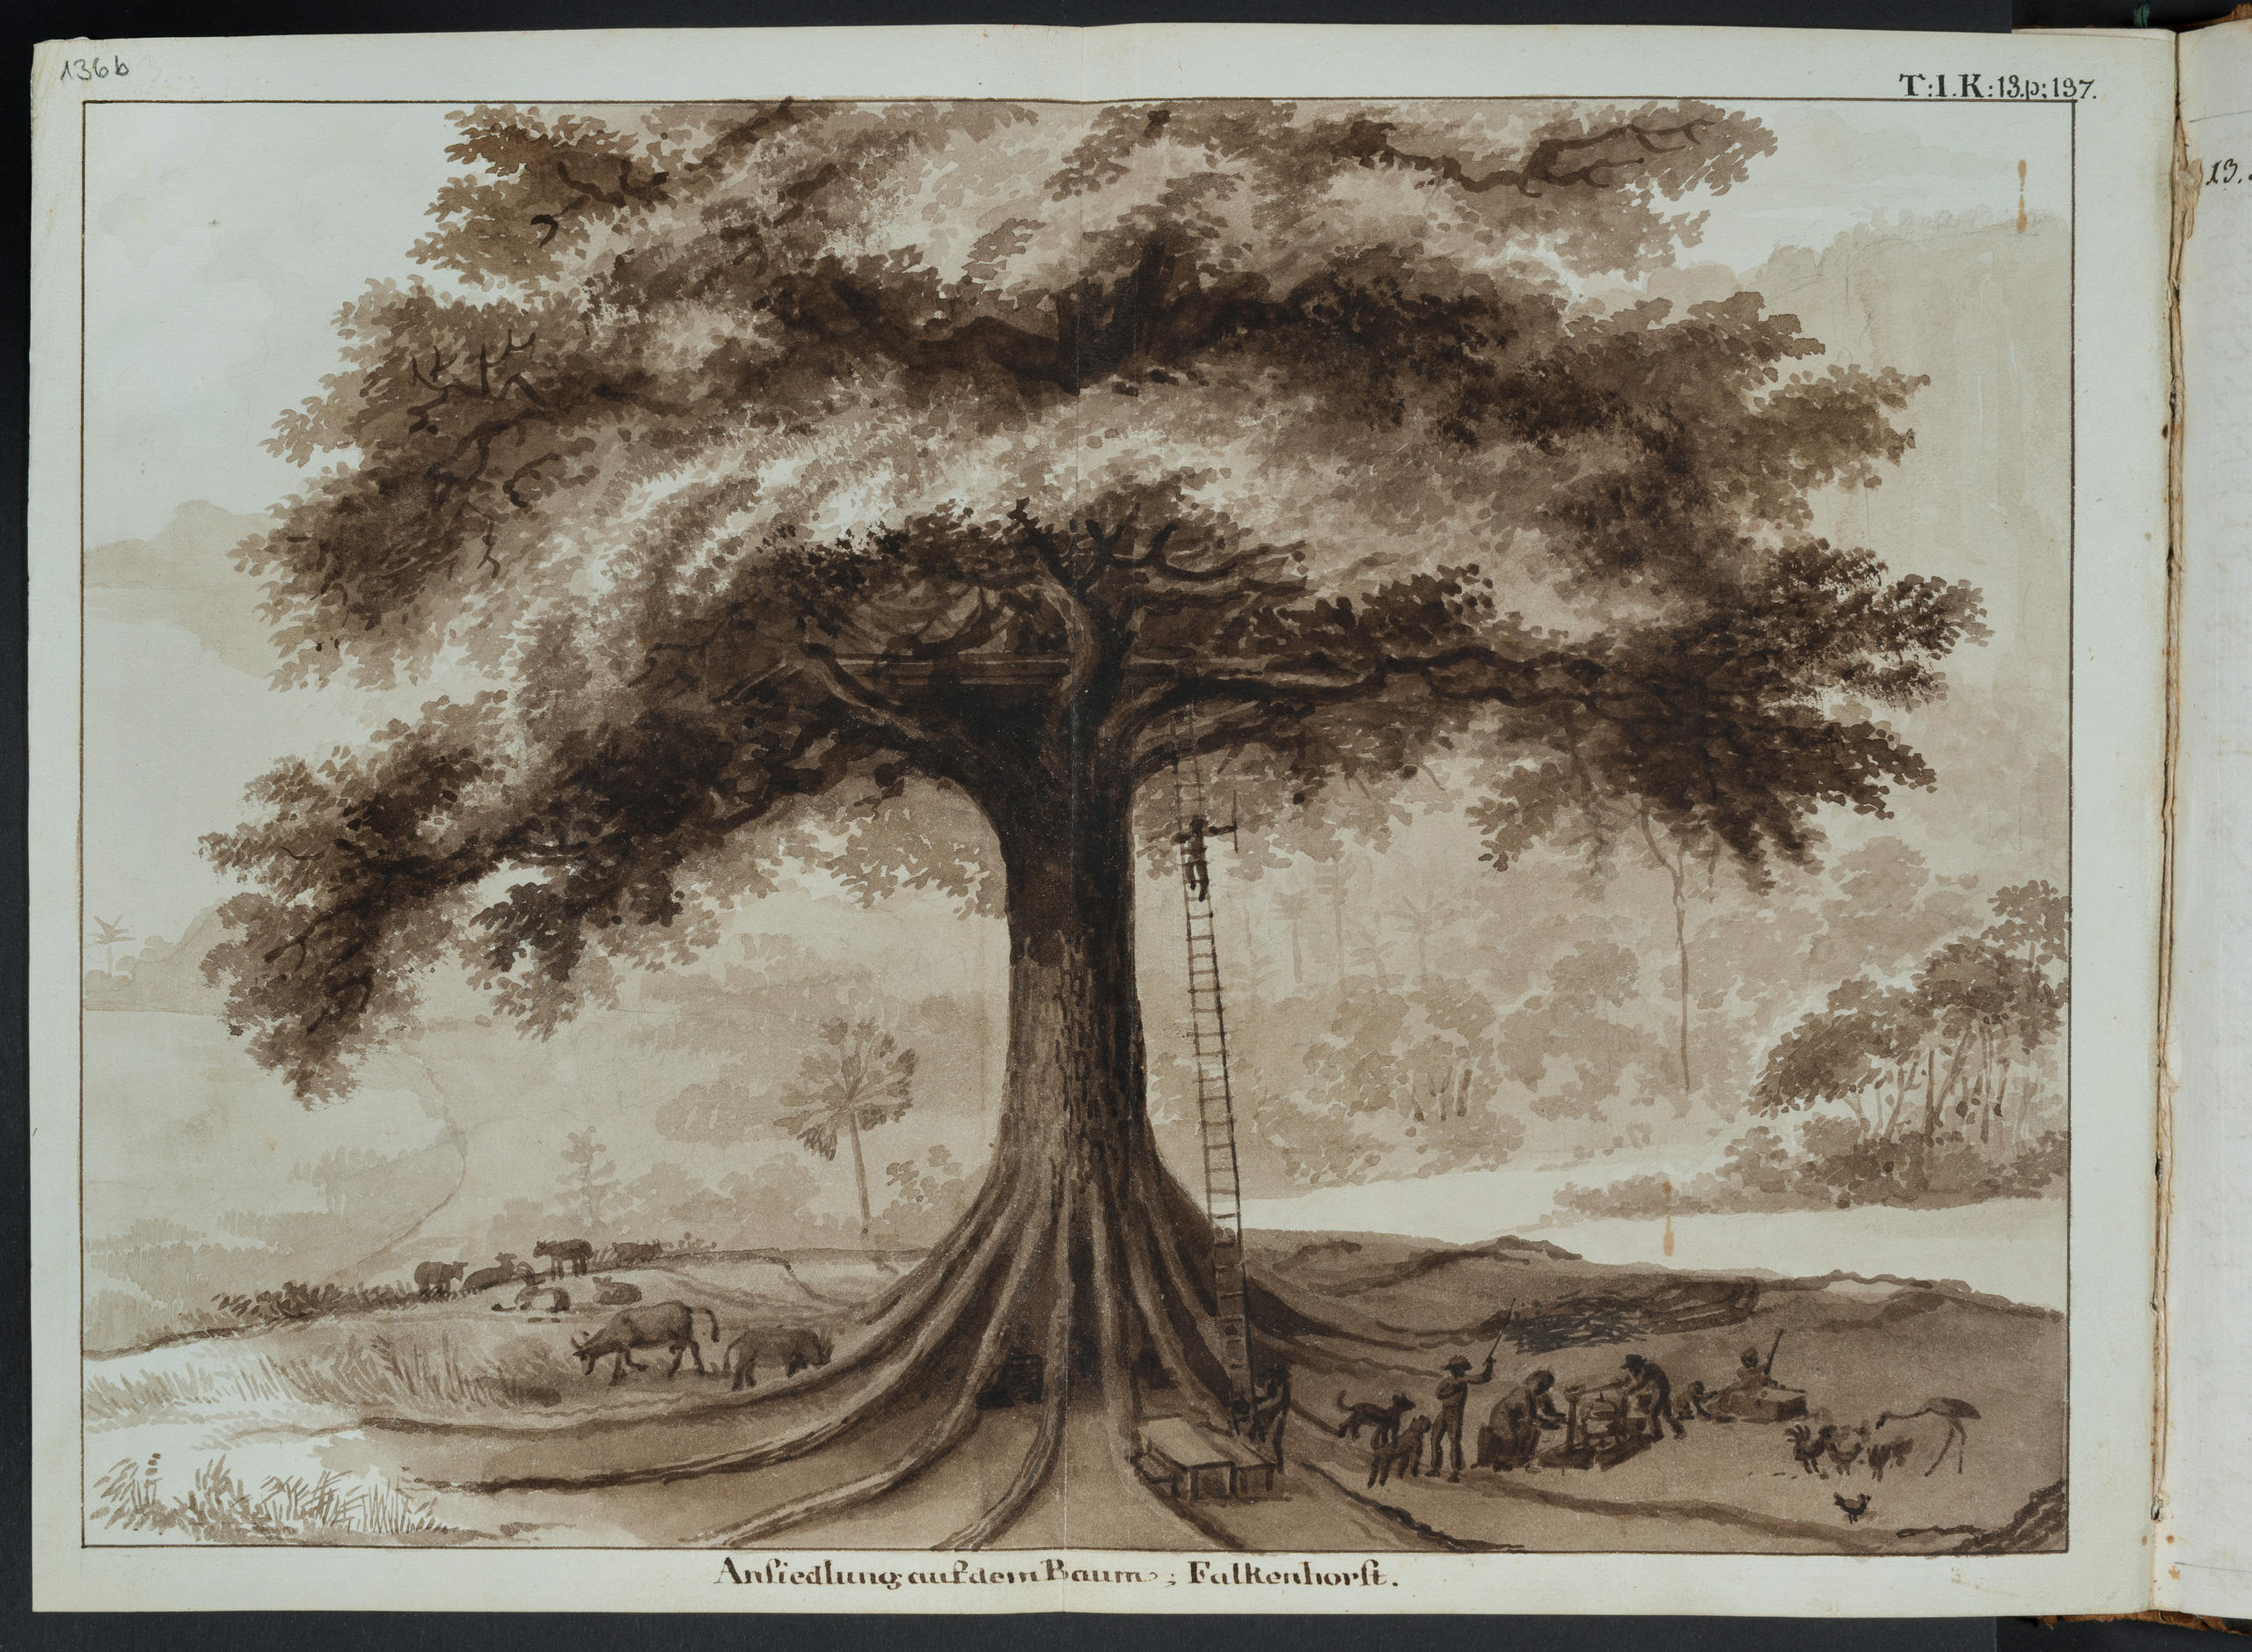 Building a treehouse, an illustration from the original manuscript